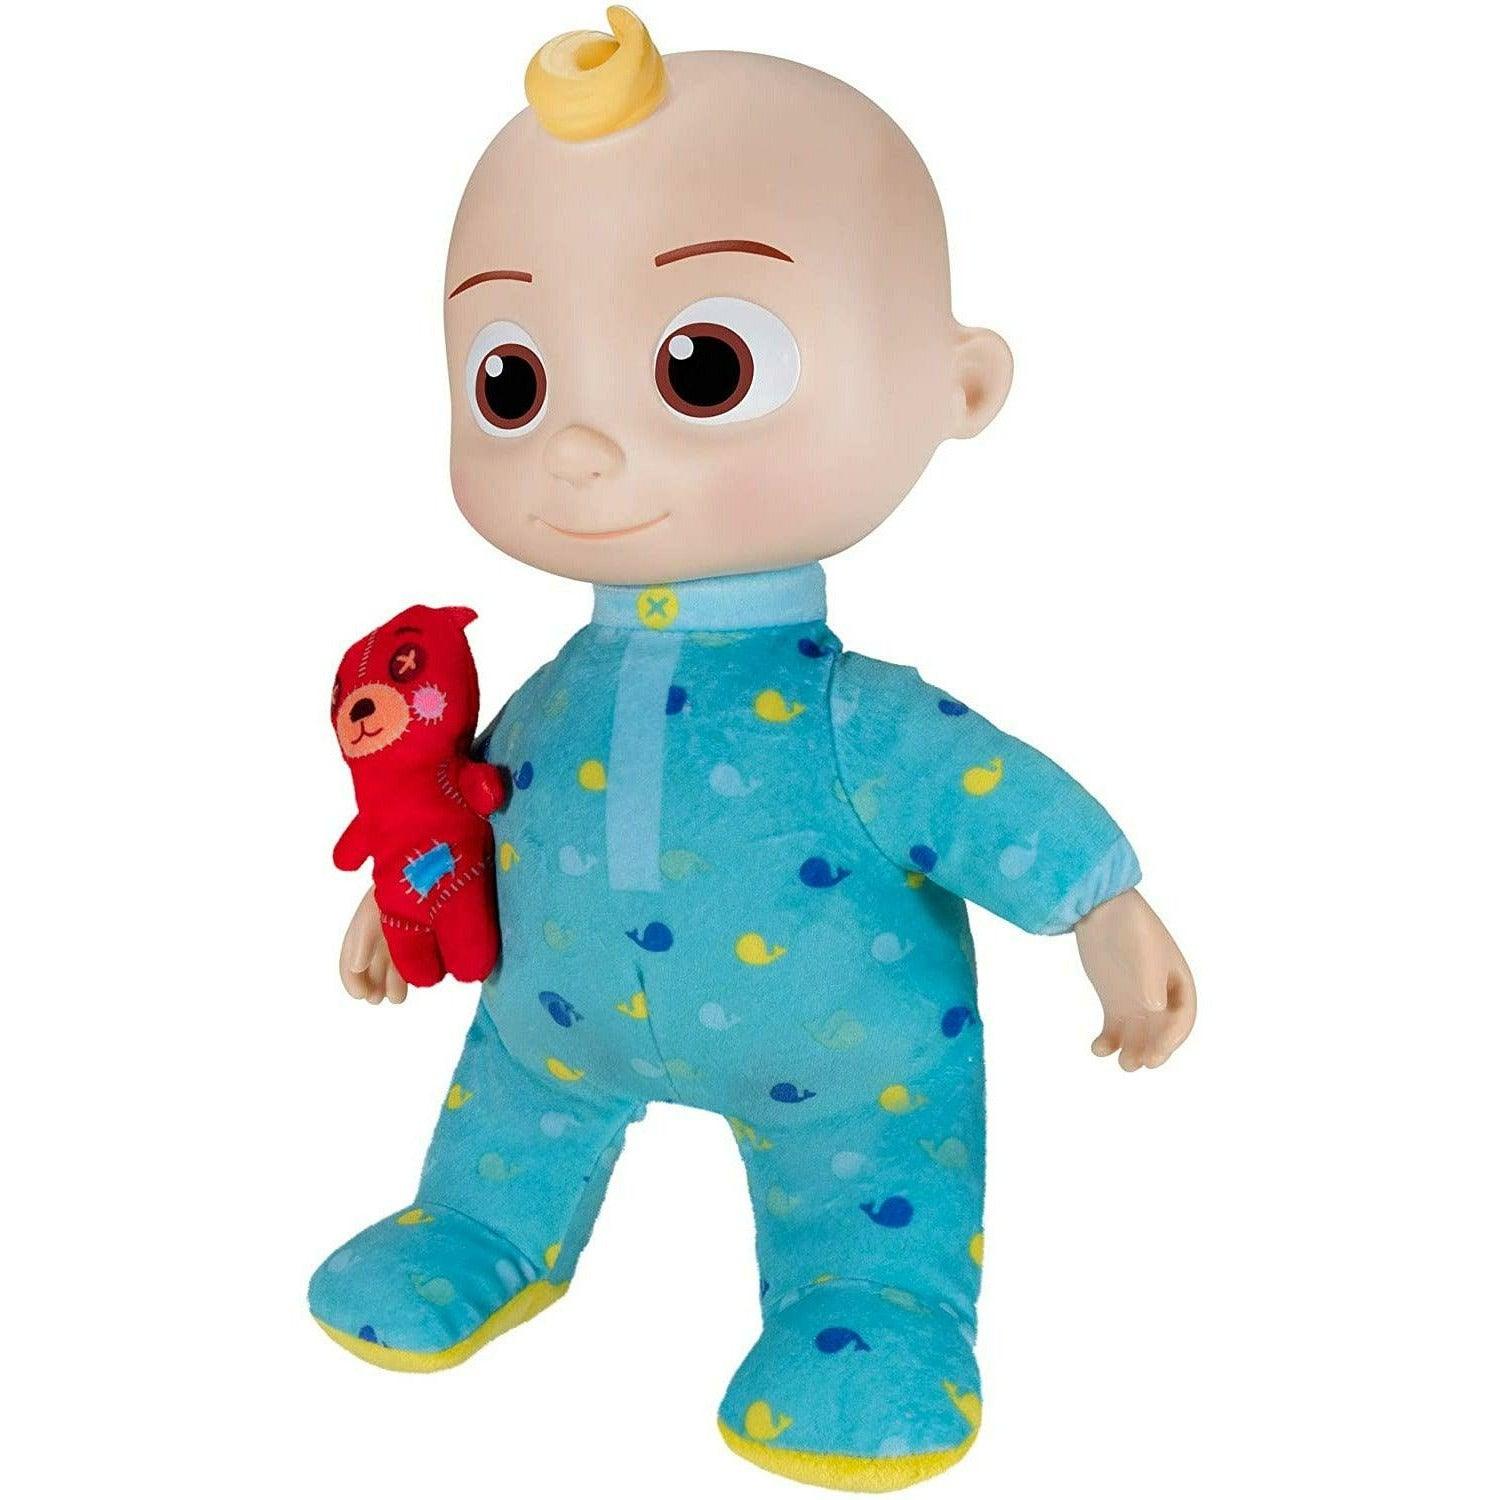 CoComelon Official Musical Bedtime JJ Doll, Soft Plush Body – Press Tummy and JJ sings clips from ‘Yes, Yes, Bedtime Song - BumbleToys - 0-24 Months, Action Figures, Boys, Cocomelon, Musical Instruments, OXE, plush, Pre-Order